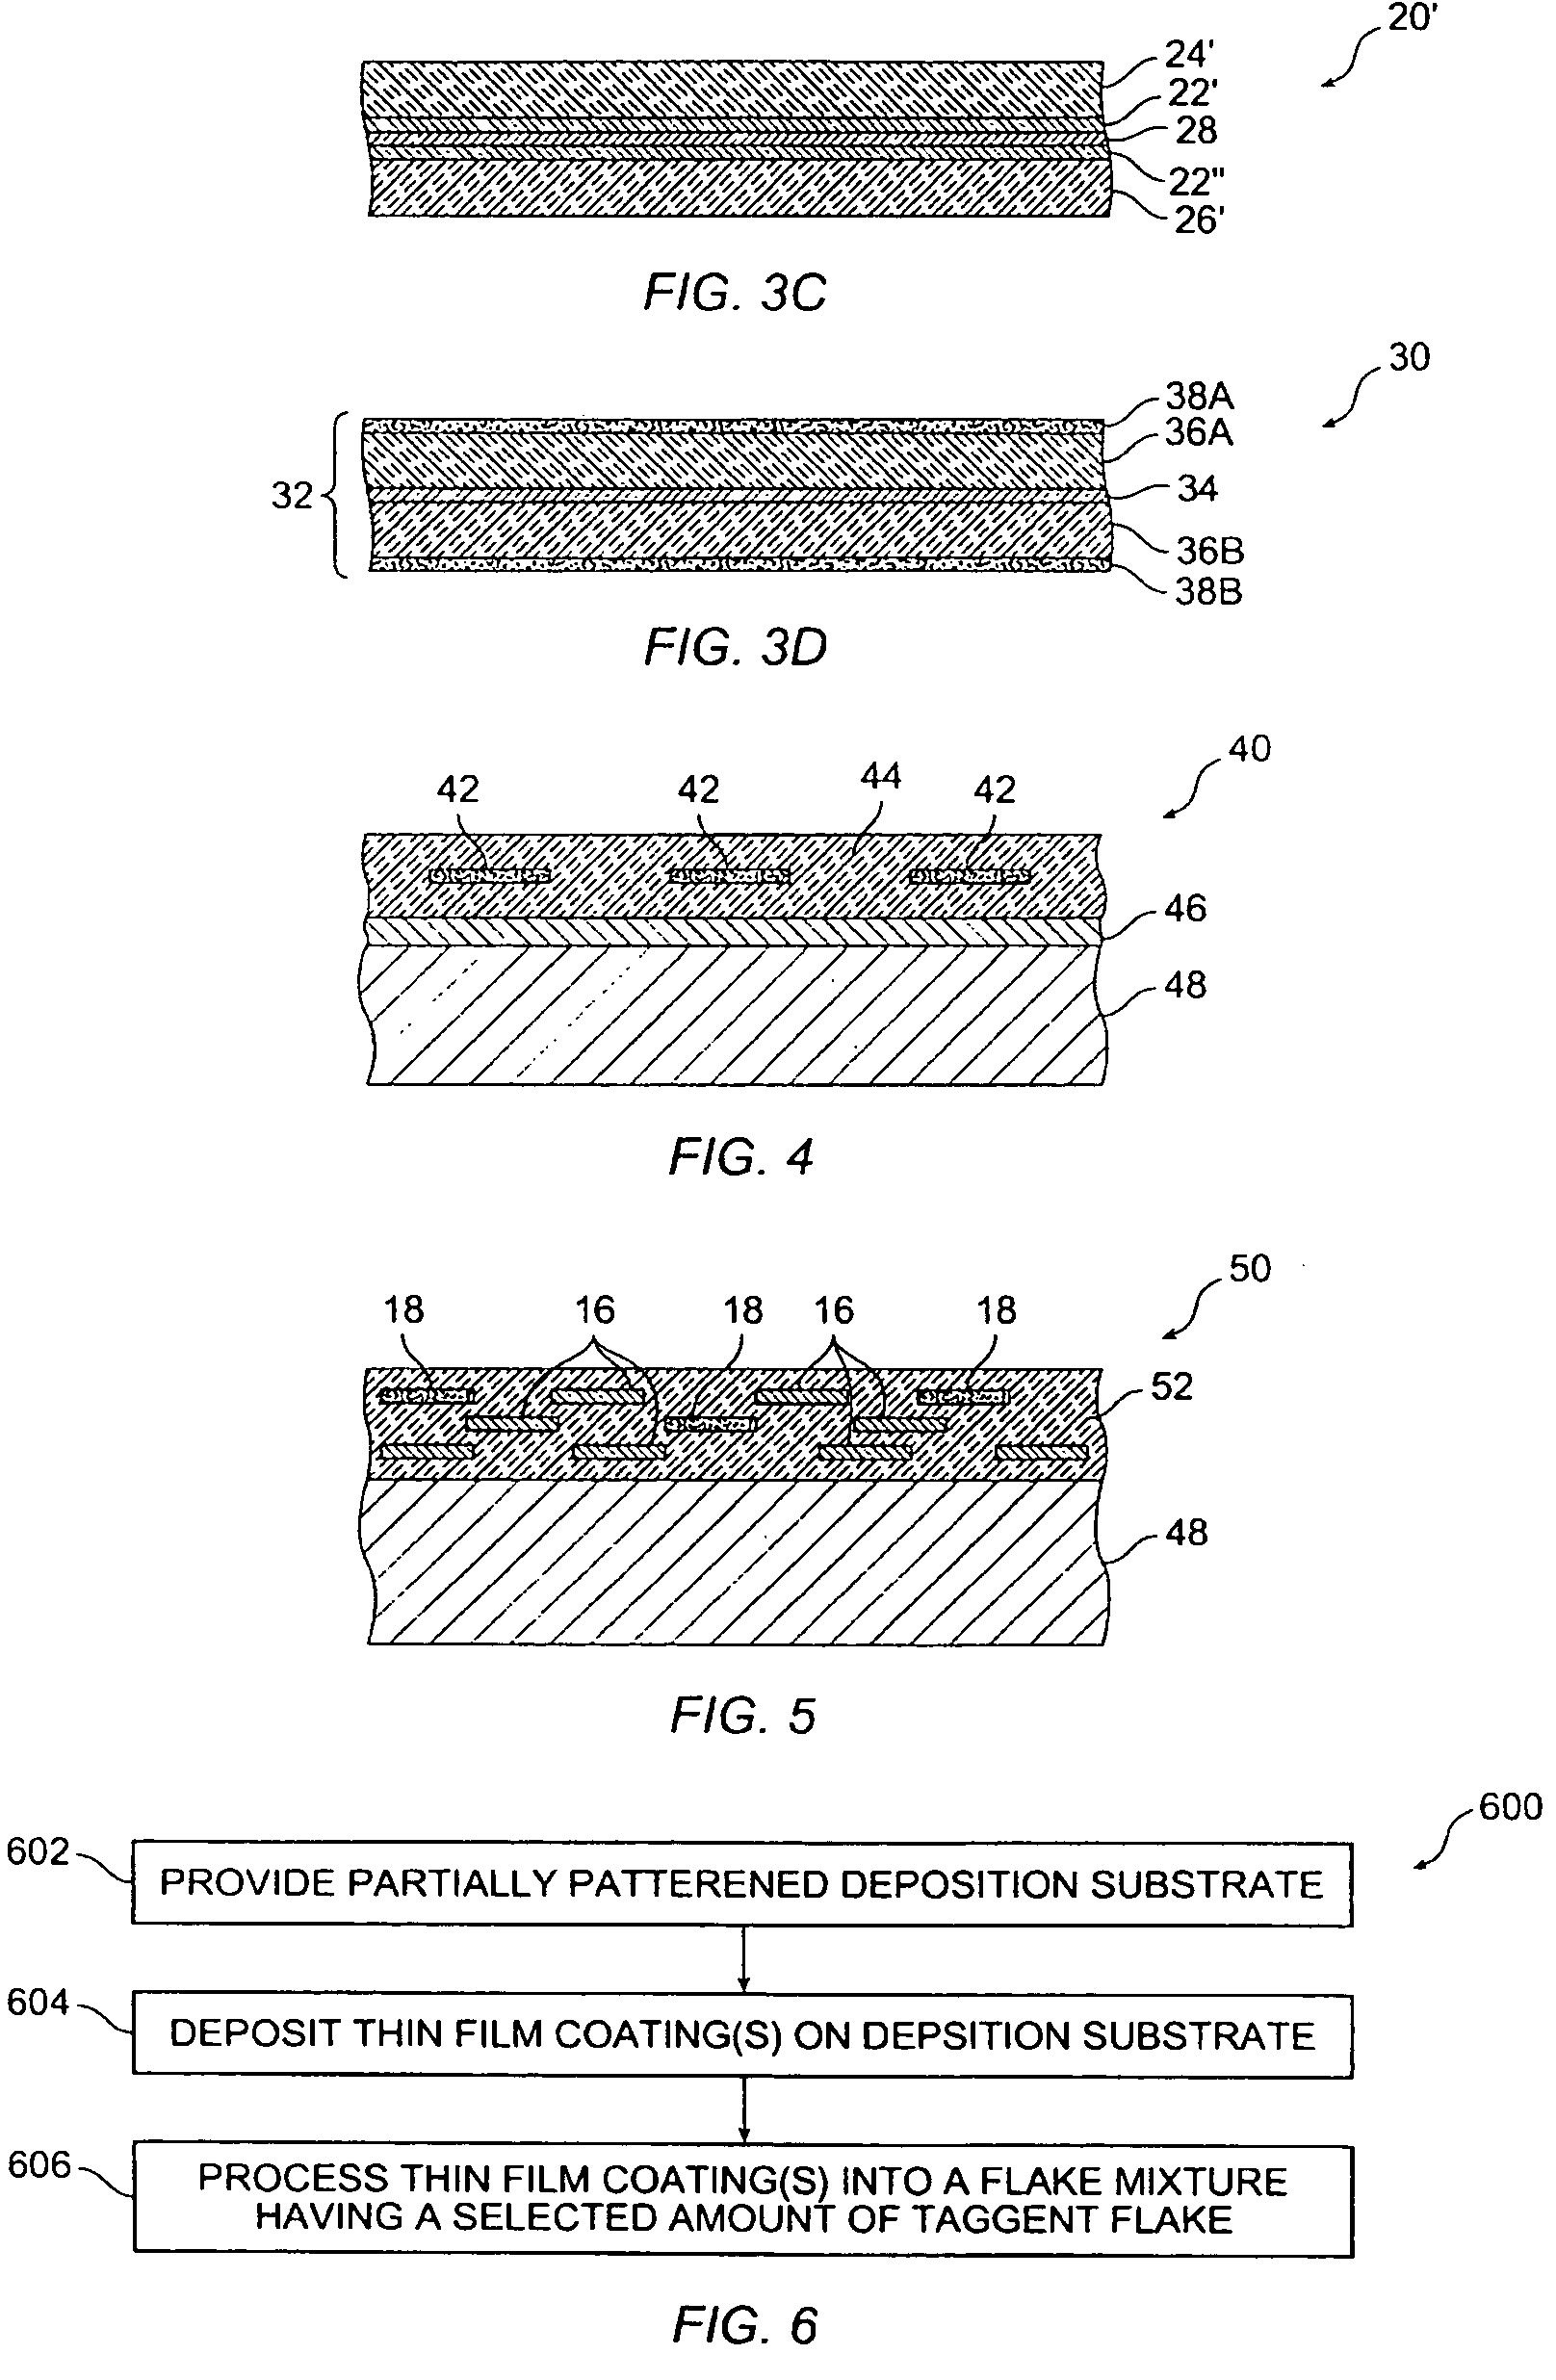 Provision of frames or borders around opaque flakes for covert security applications